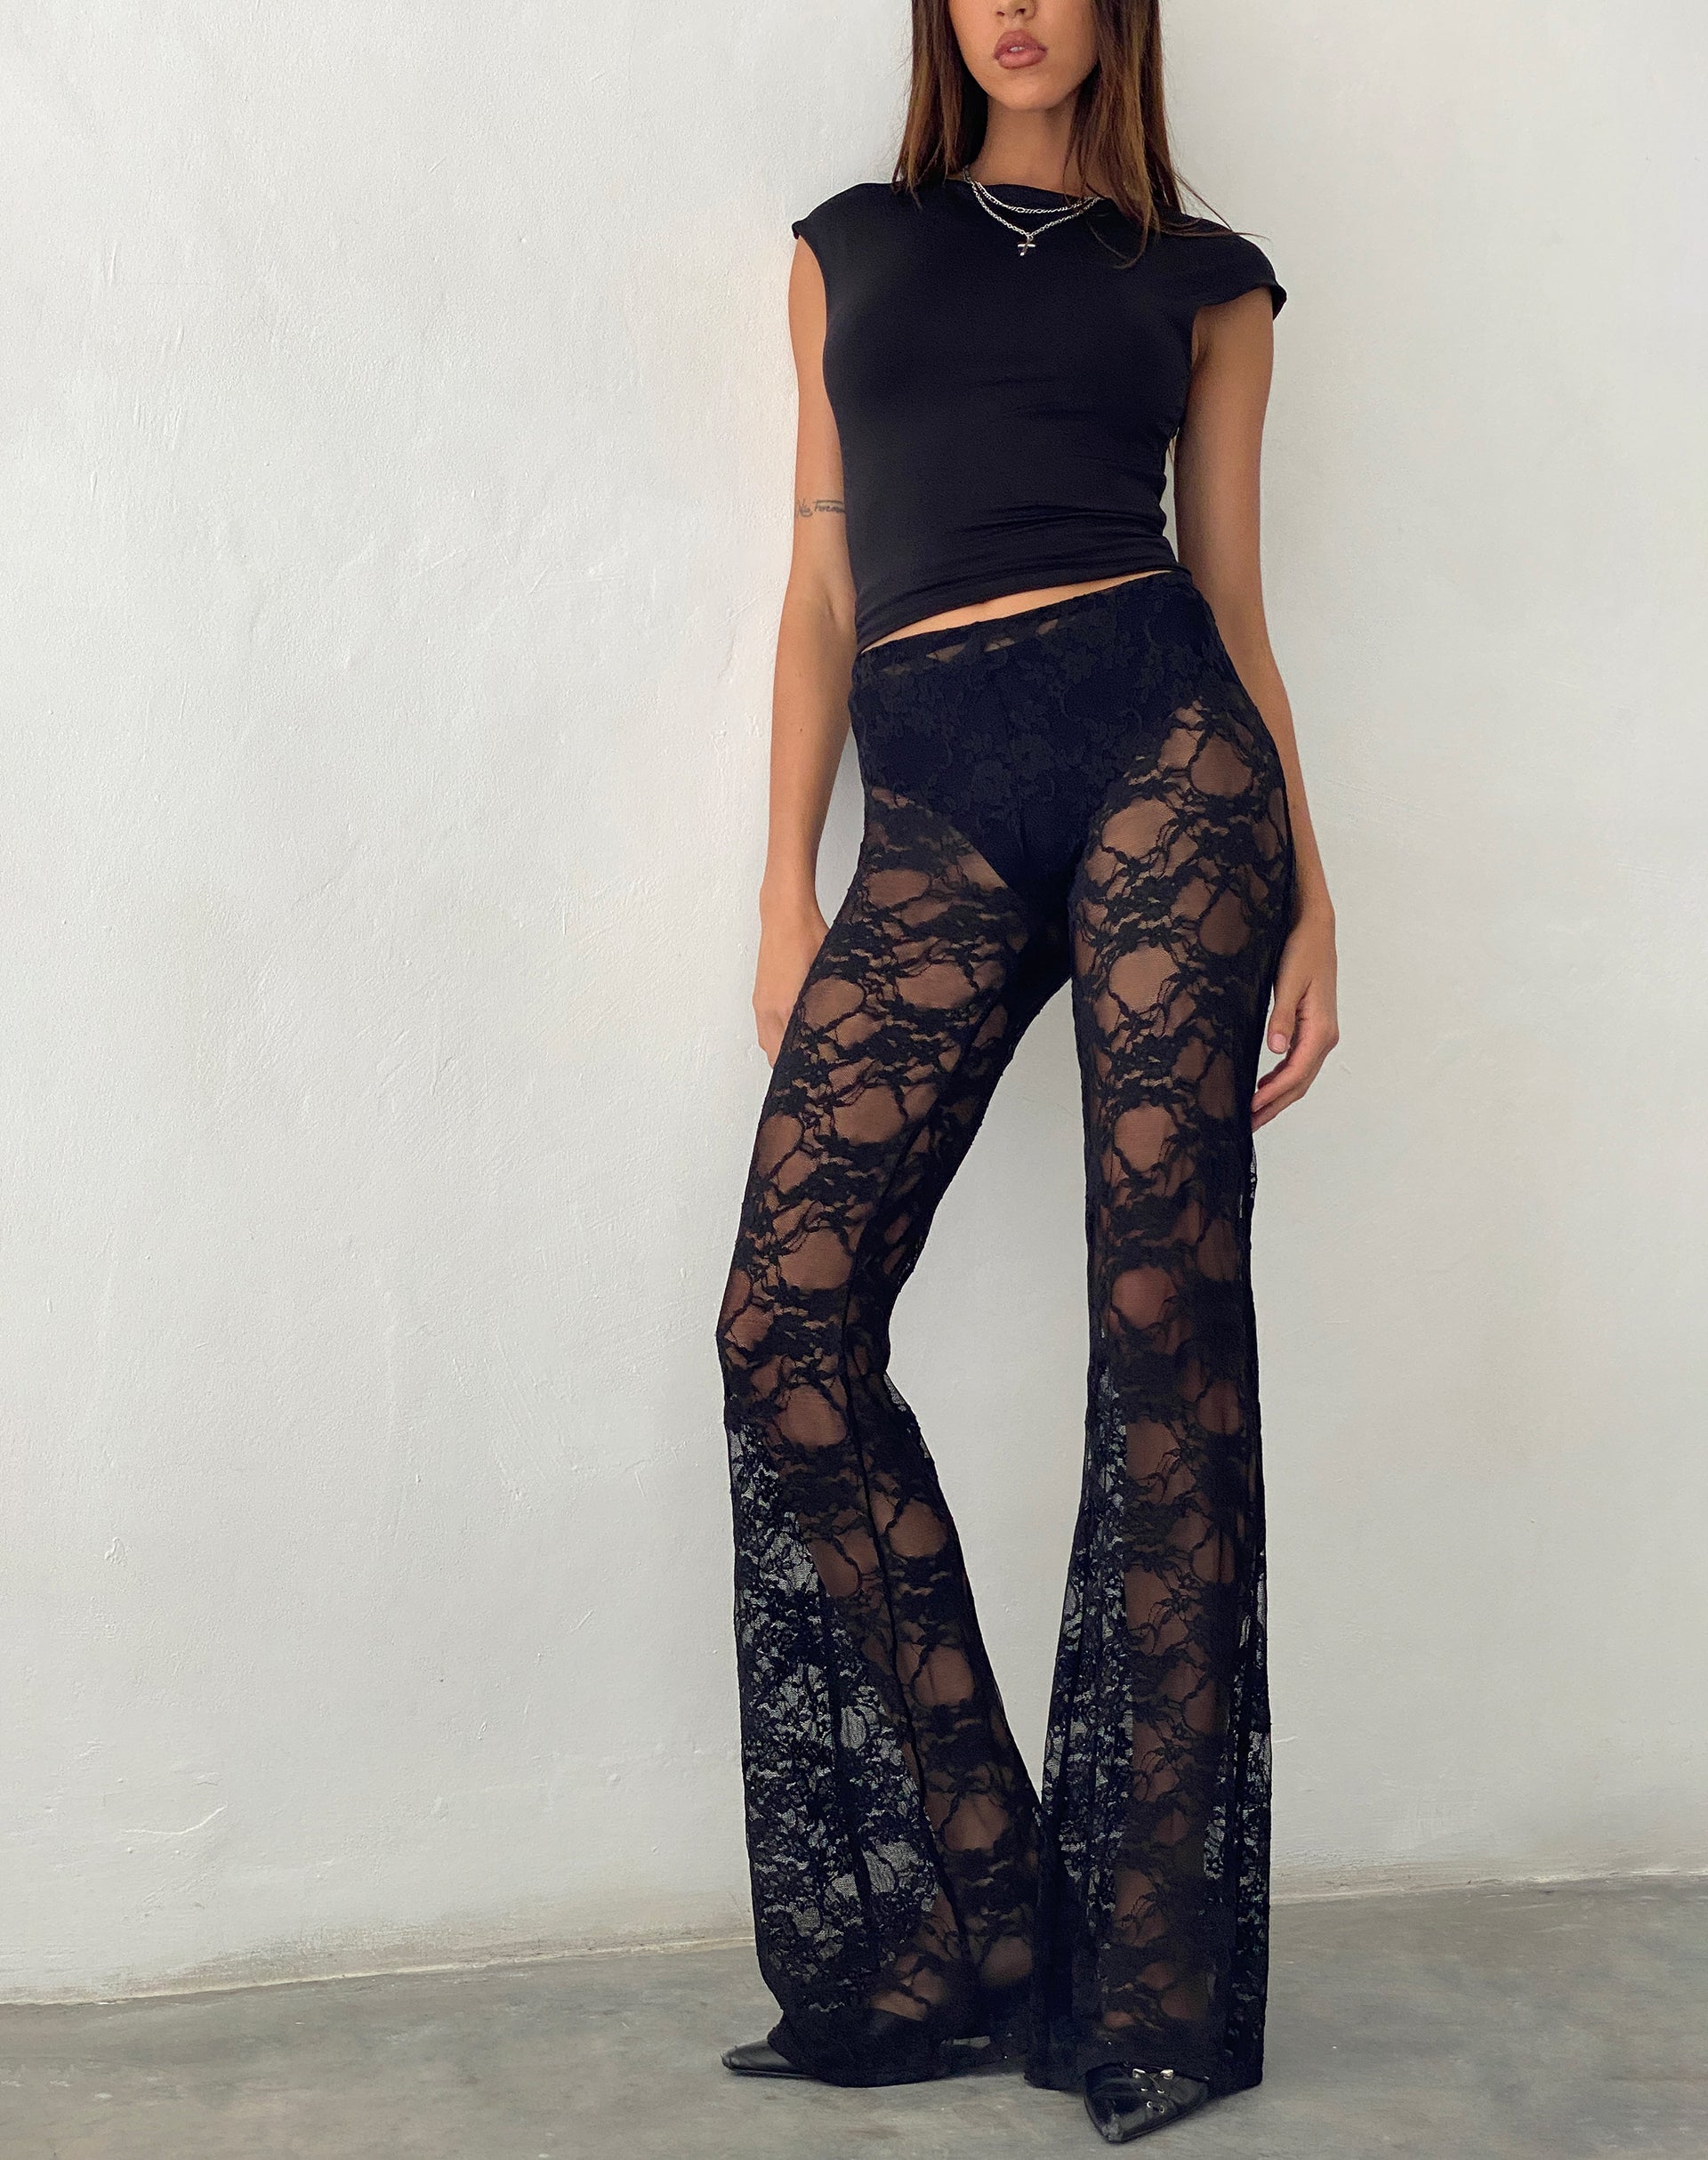 Black Sheer Lace High Waisted Flared Pants